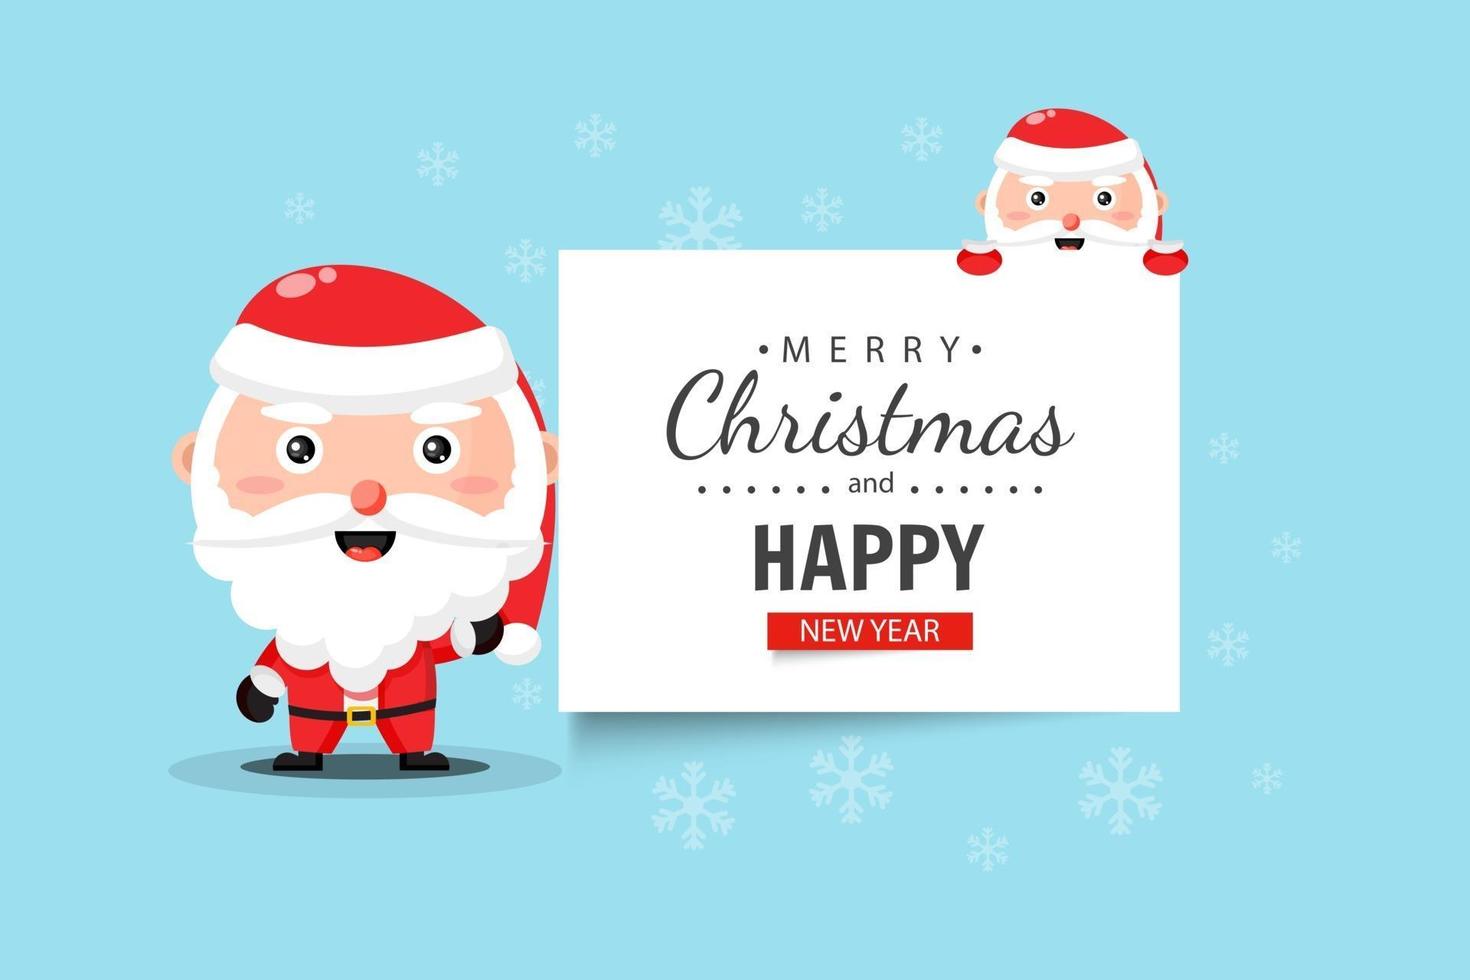 Cute Santa Claus wishes you a Merry Christmas and Happy New Year vector